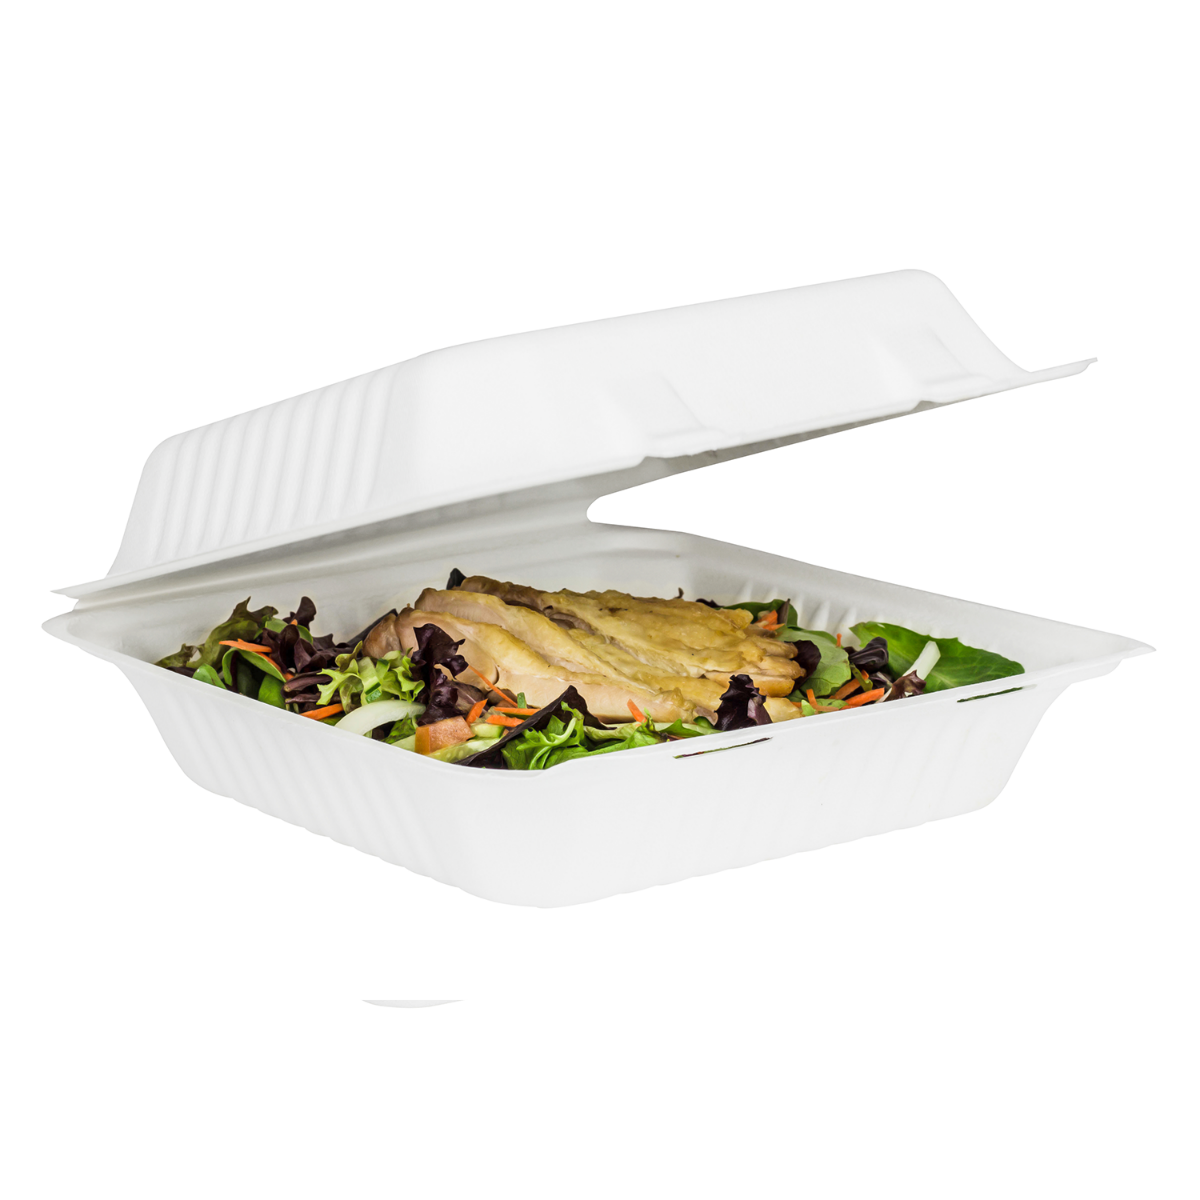 100% Compostable Disposable Food Containers with Lids [9”X9” 200 Pack] —  Earth's Natural Alternative®